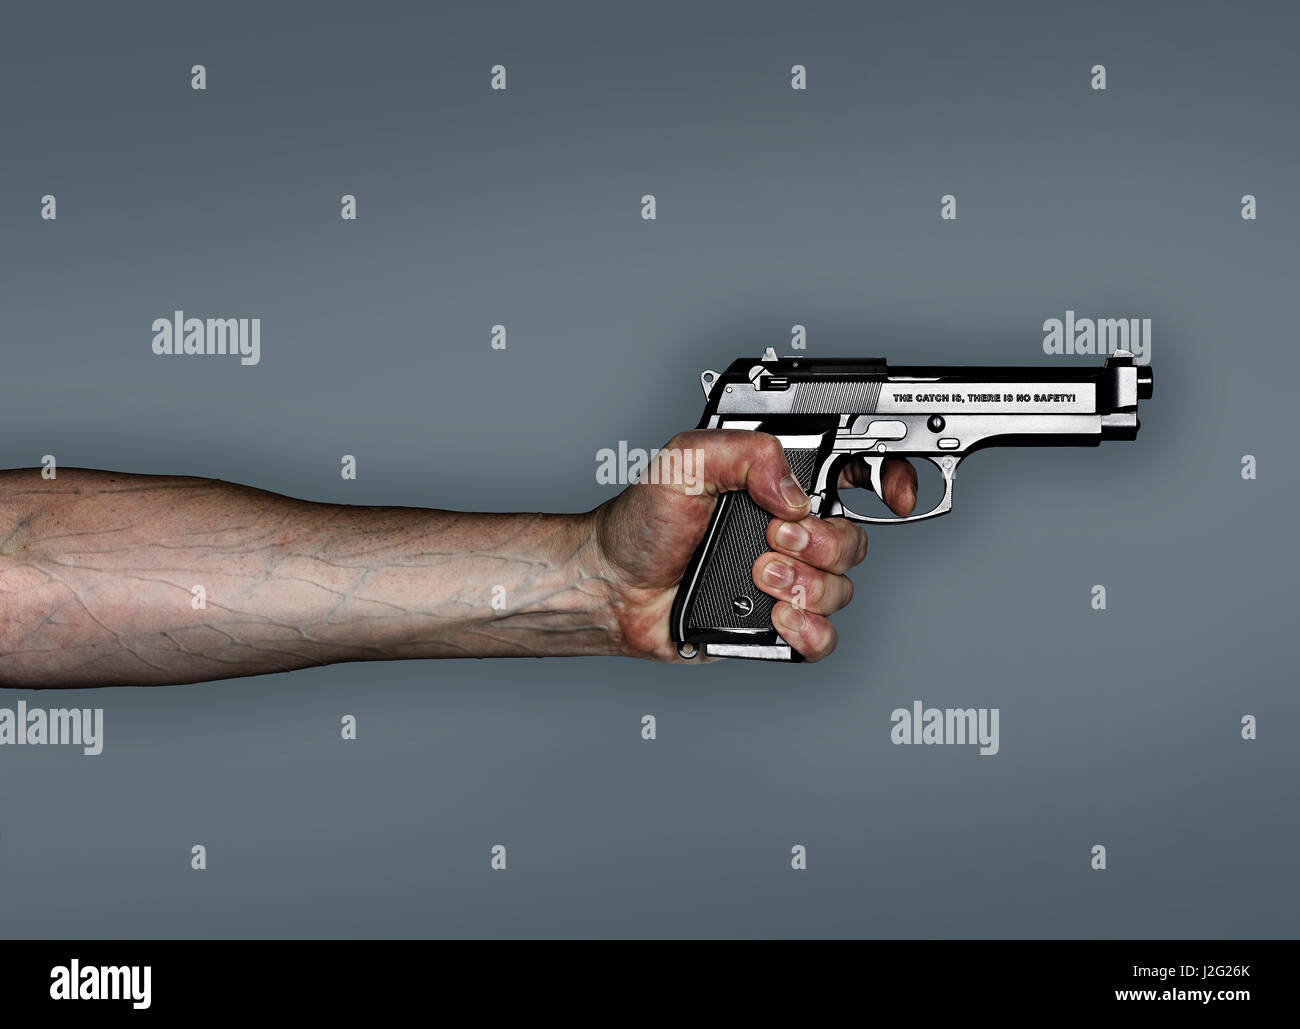 Hand holding pistol, anti gun campaign. The catch is, there is no safety, written on the side of the pistol Stock Photo